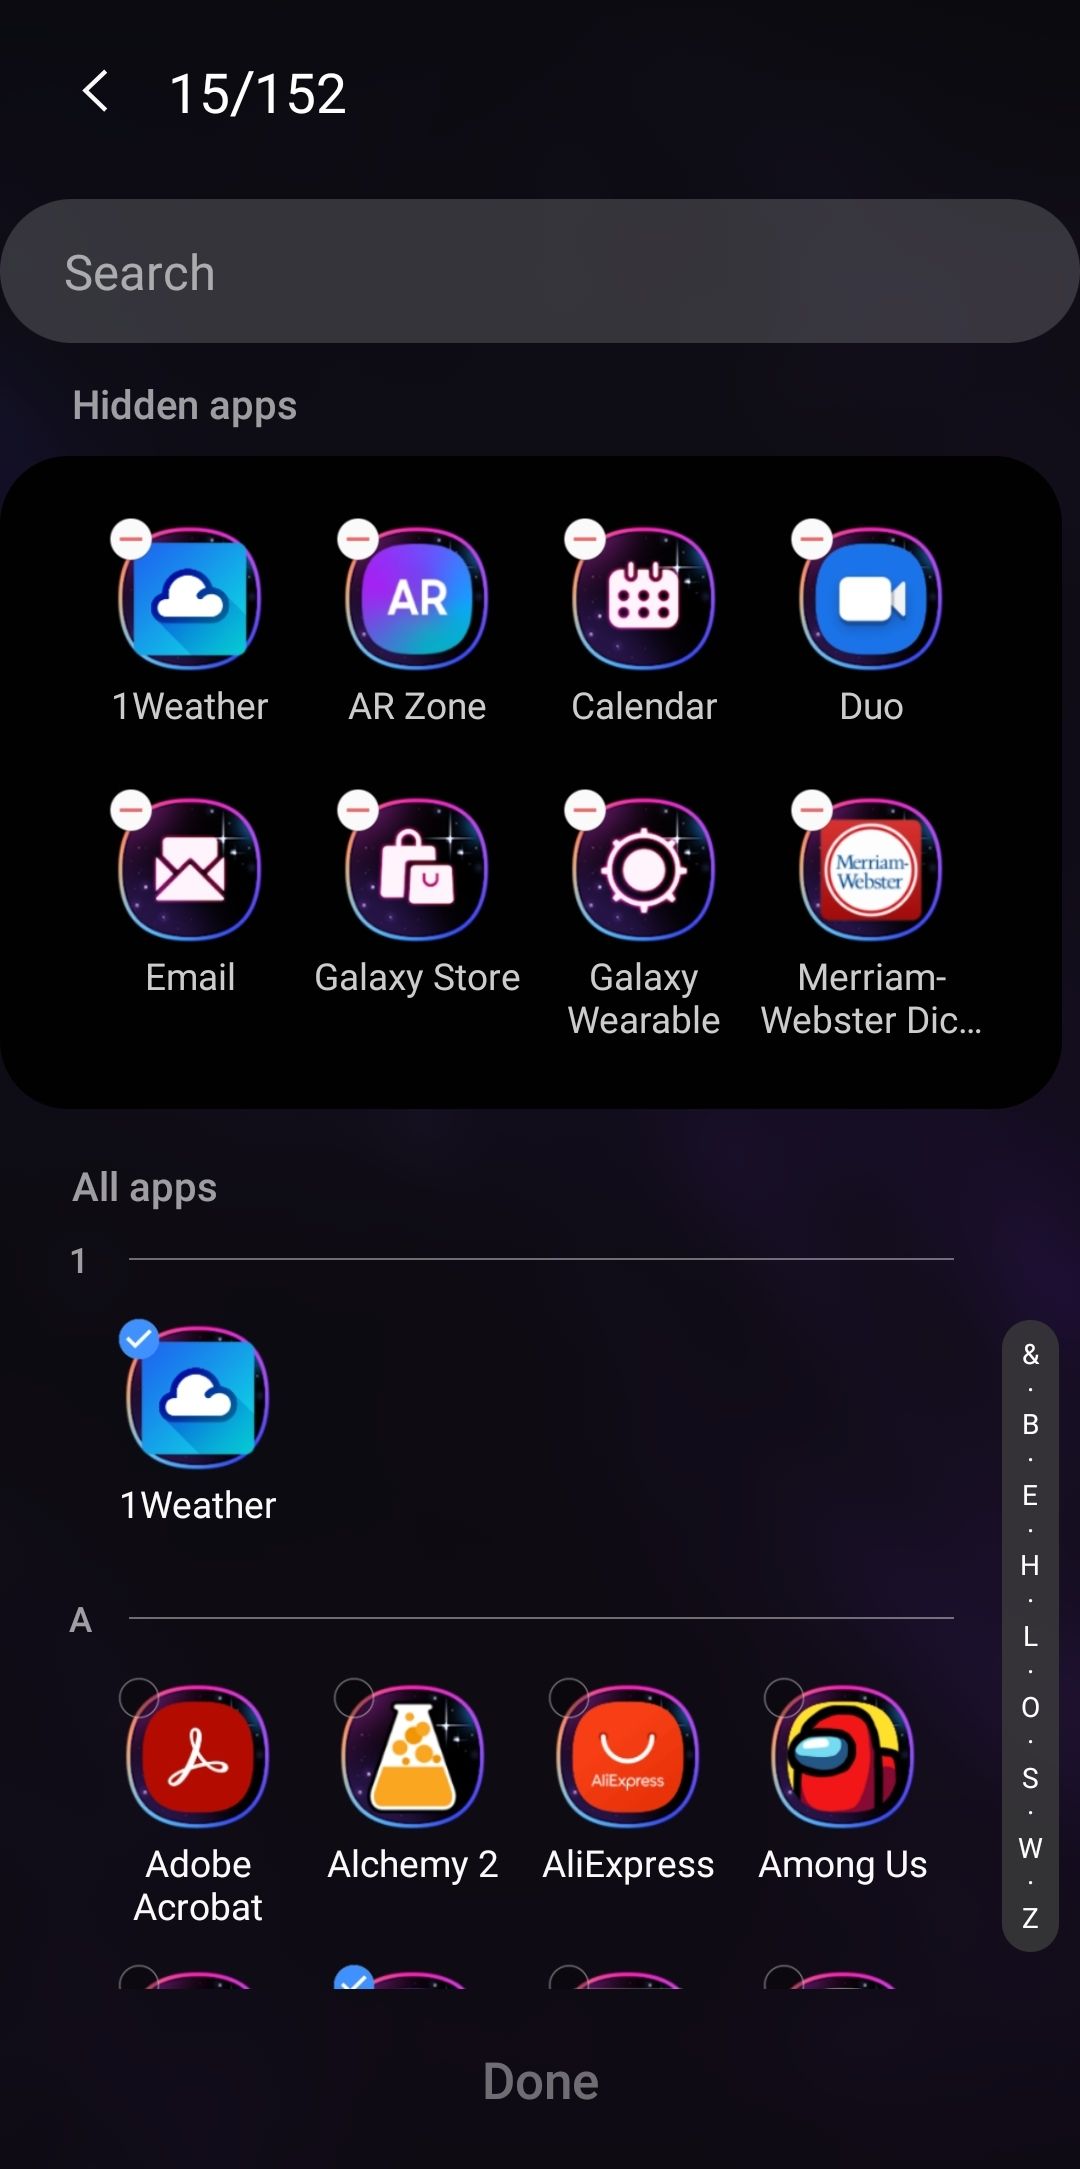 the OneUI OS lets you hide app icons